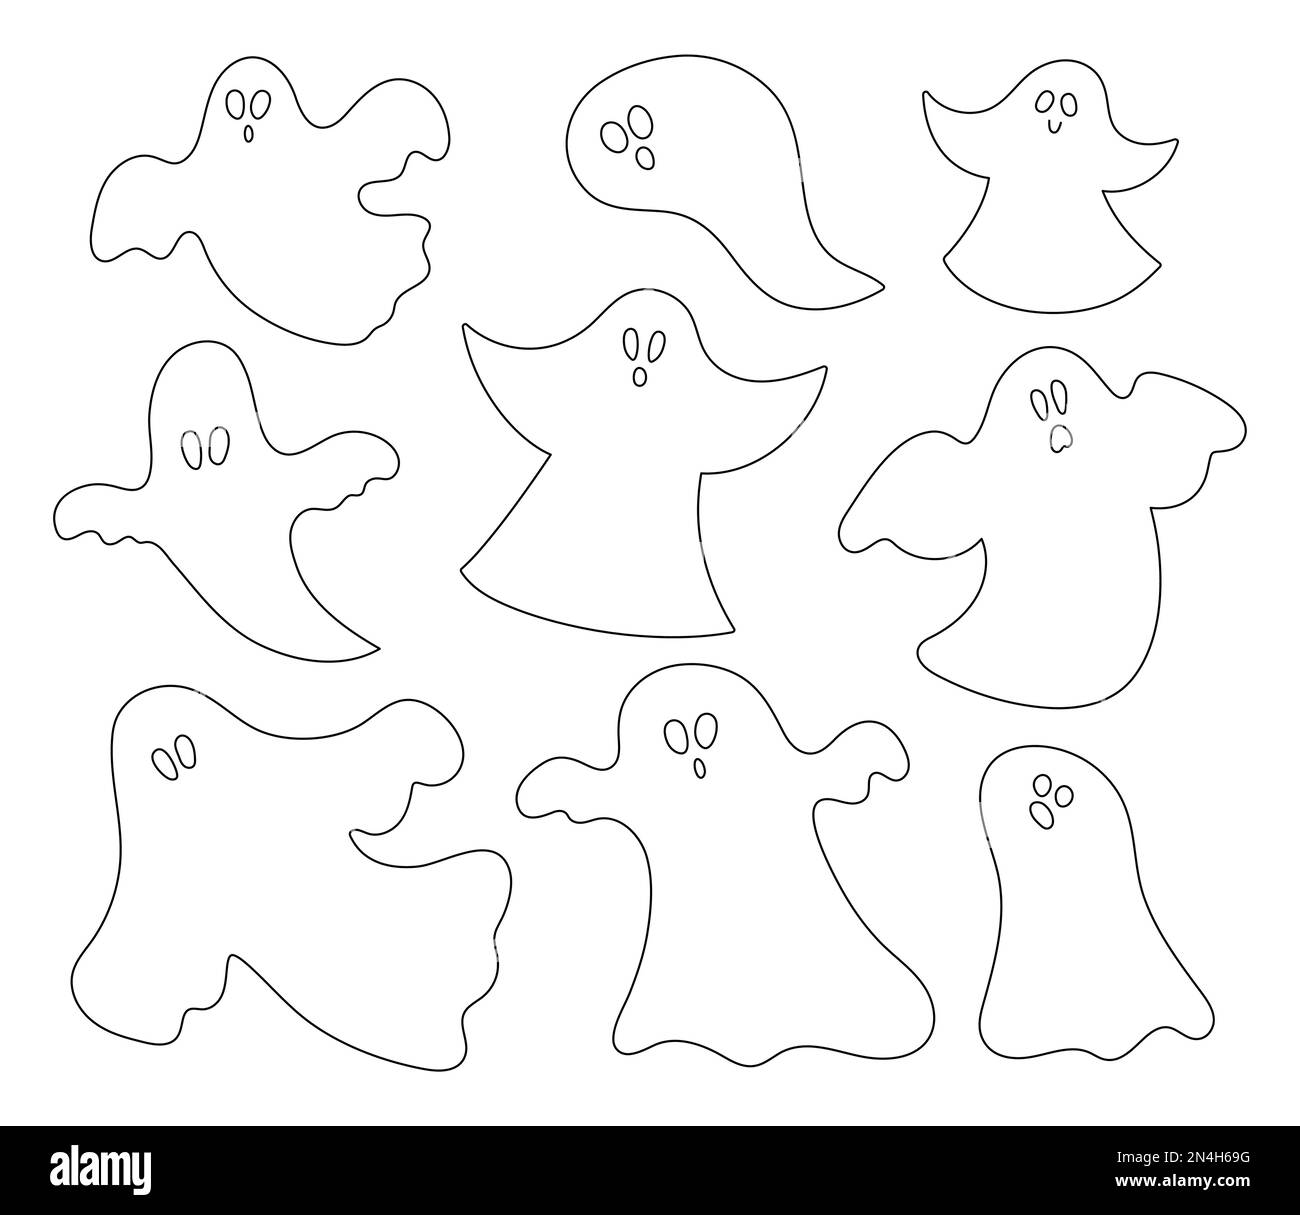 Vector black and white ghosts set outline halloween party illustration or coloring page with funny spooks scary design for autumn samhain party all stock vector image art